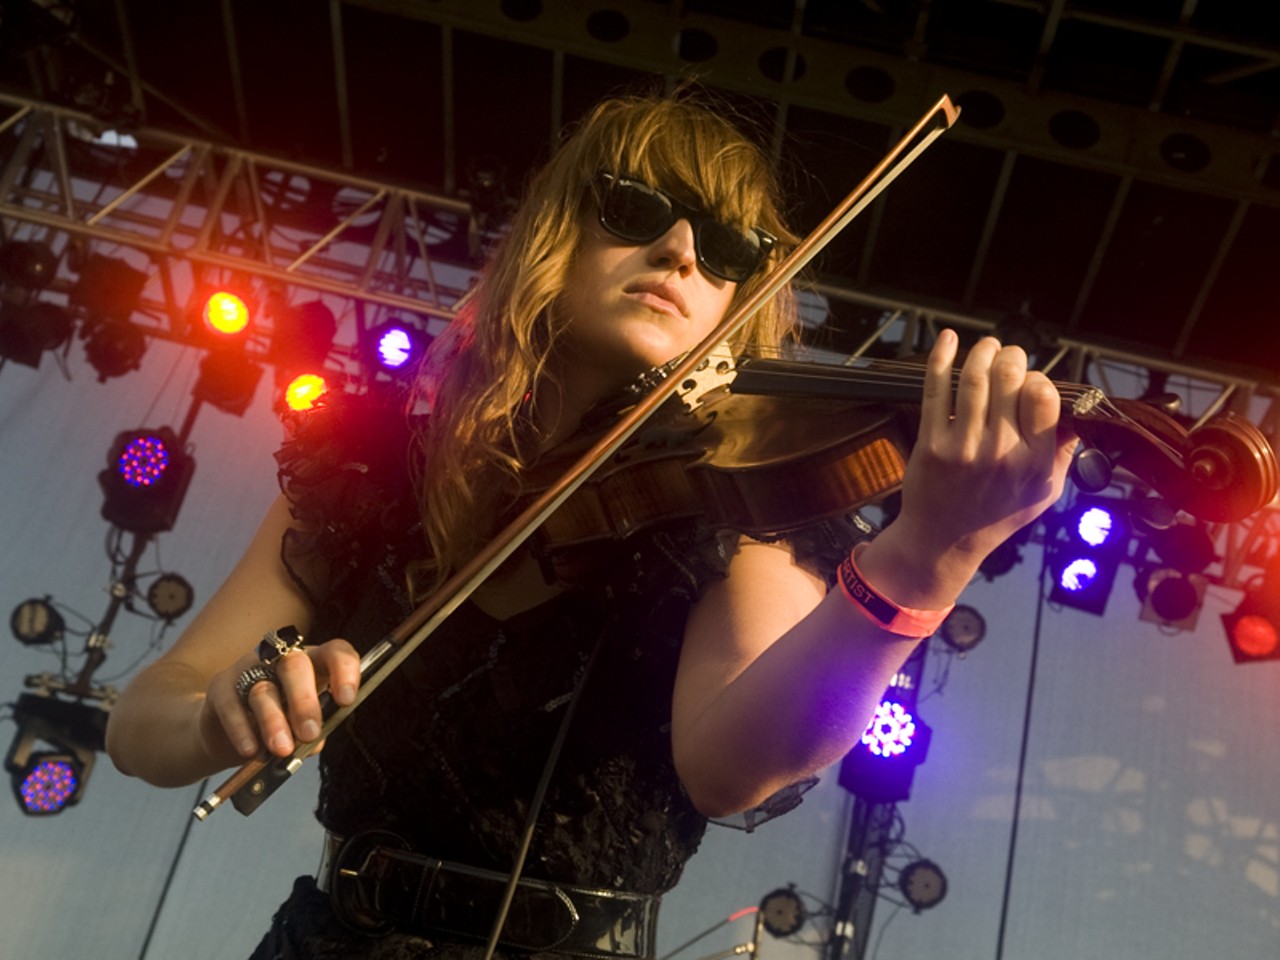 Airborne Toxic Event performing at the LouFest.